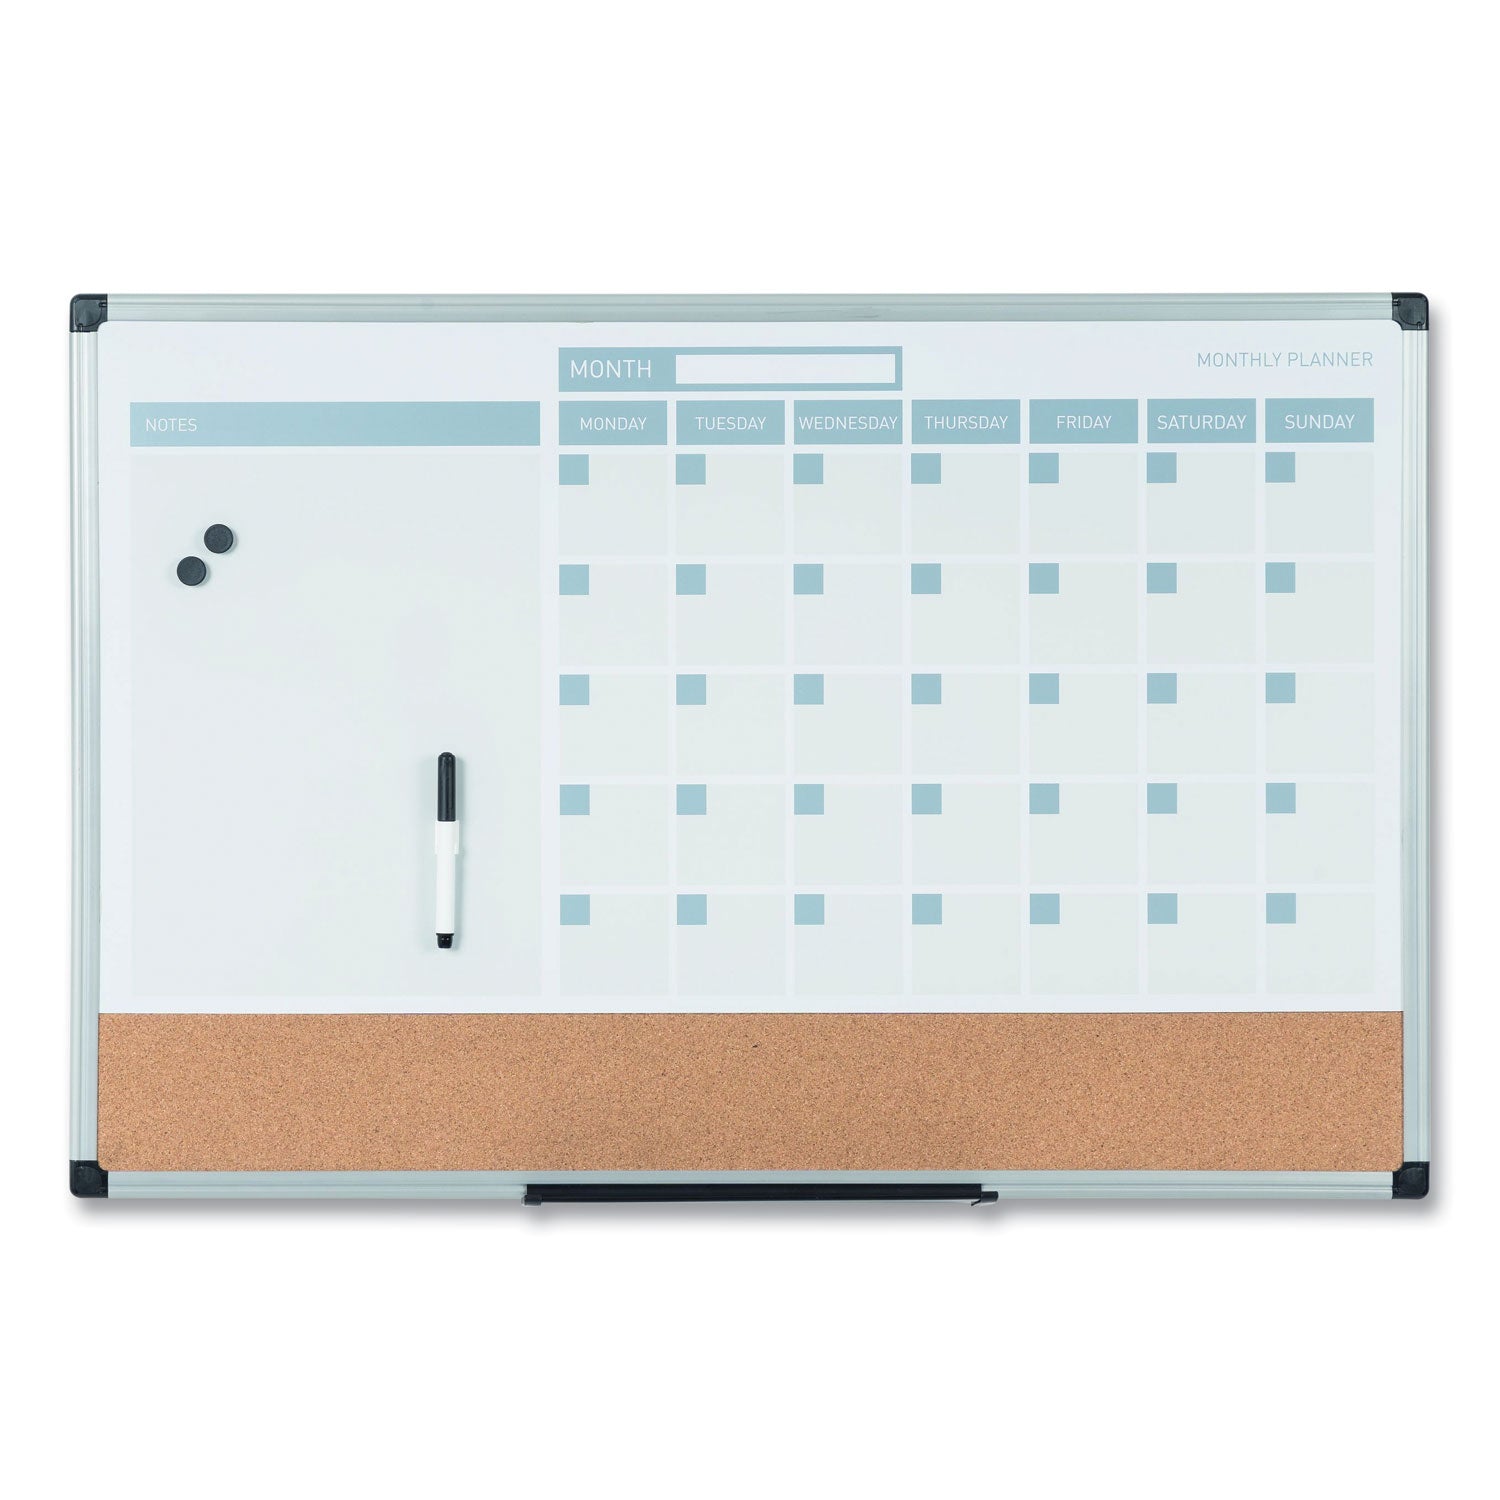 3-in-1 Planner Board, 24 x 18, Tan/White/Blue Surface, Silver Aluminum Frame - 